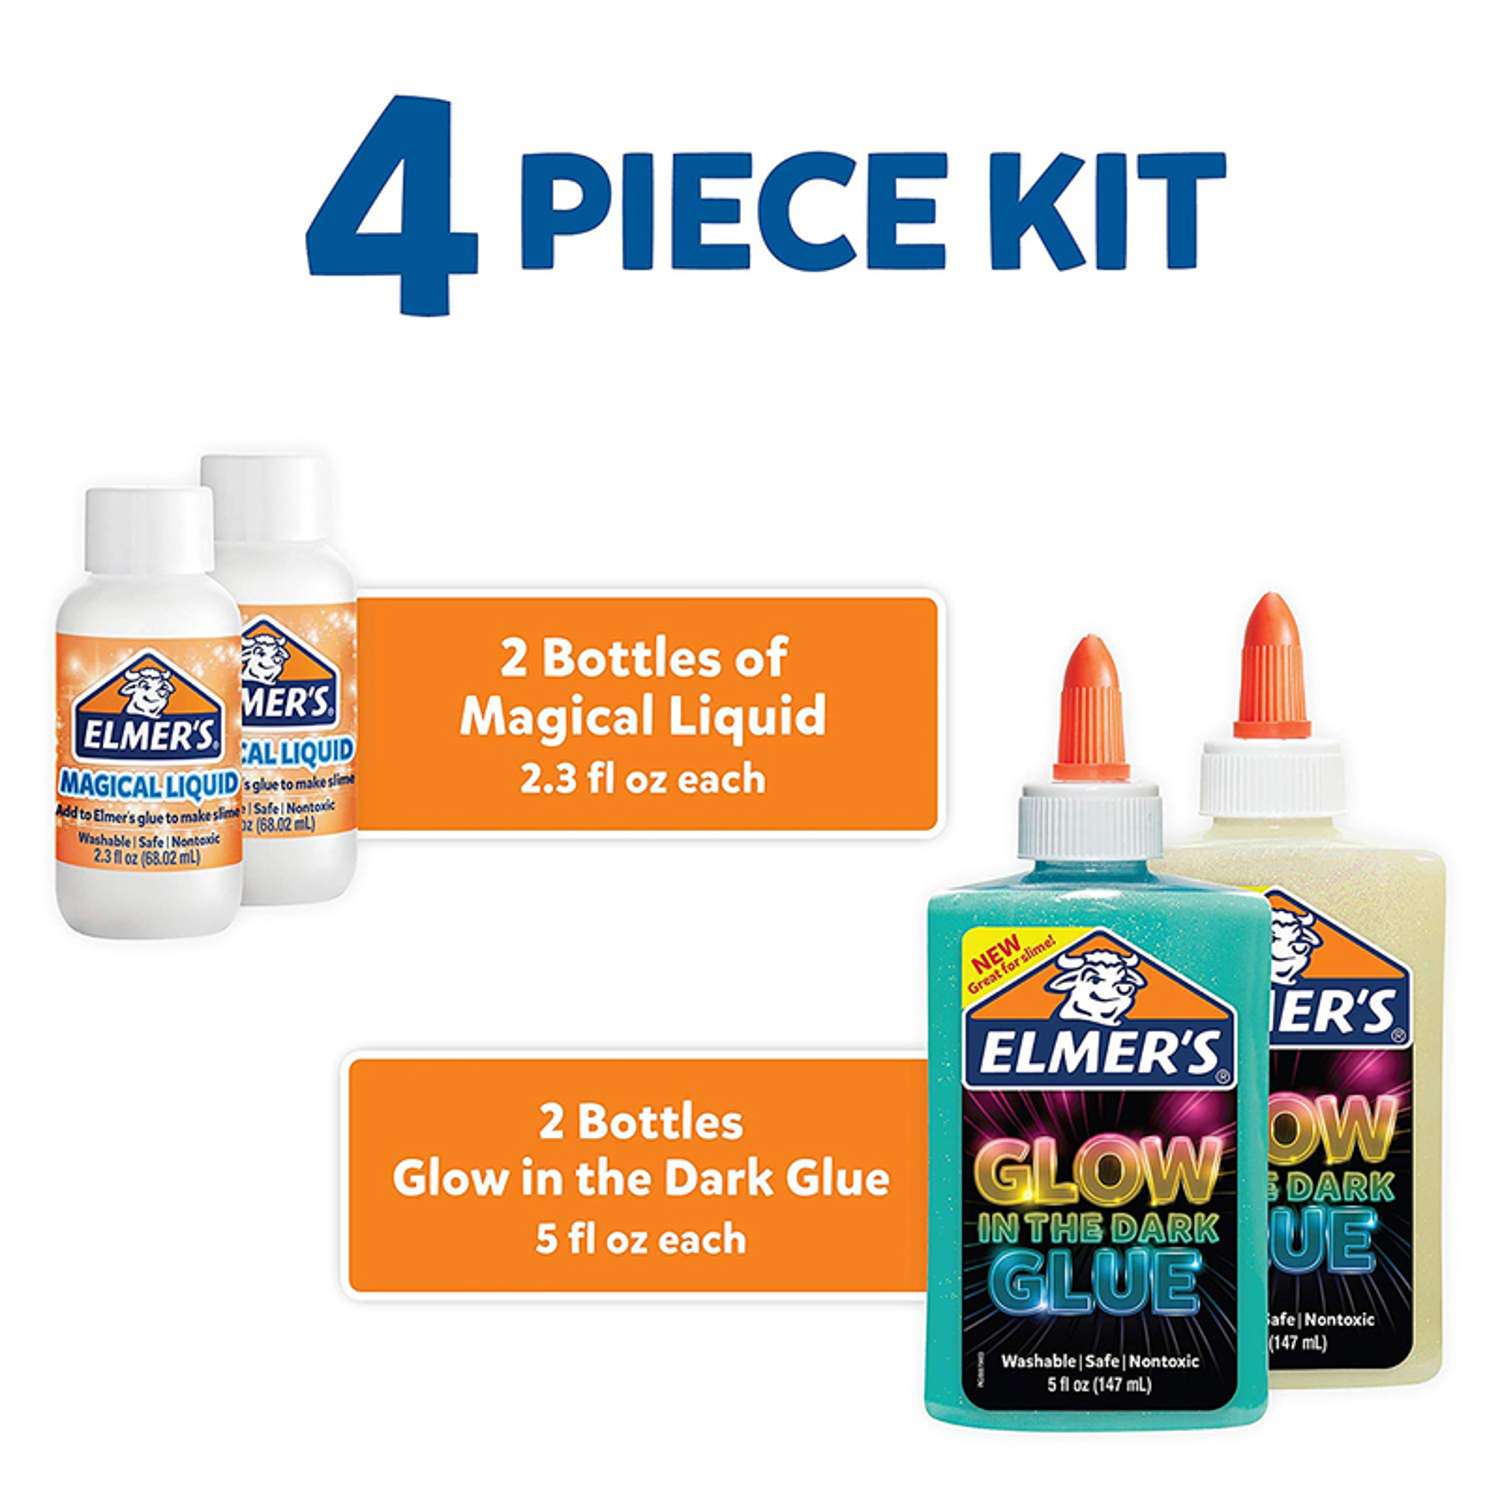 Save on Elmer's Glow In The Dark Glue Natural Order Online Delivery